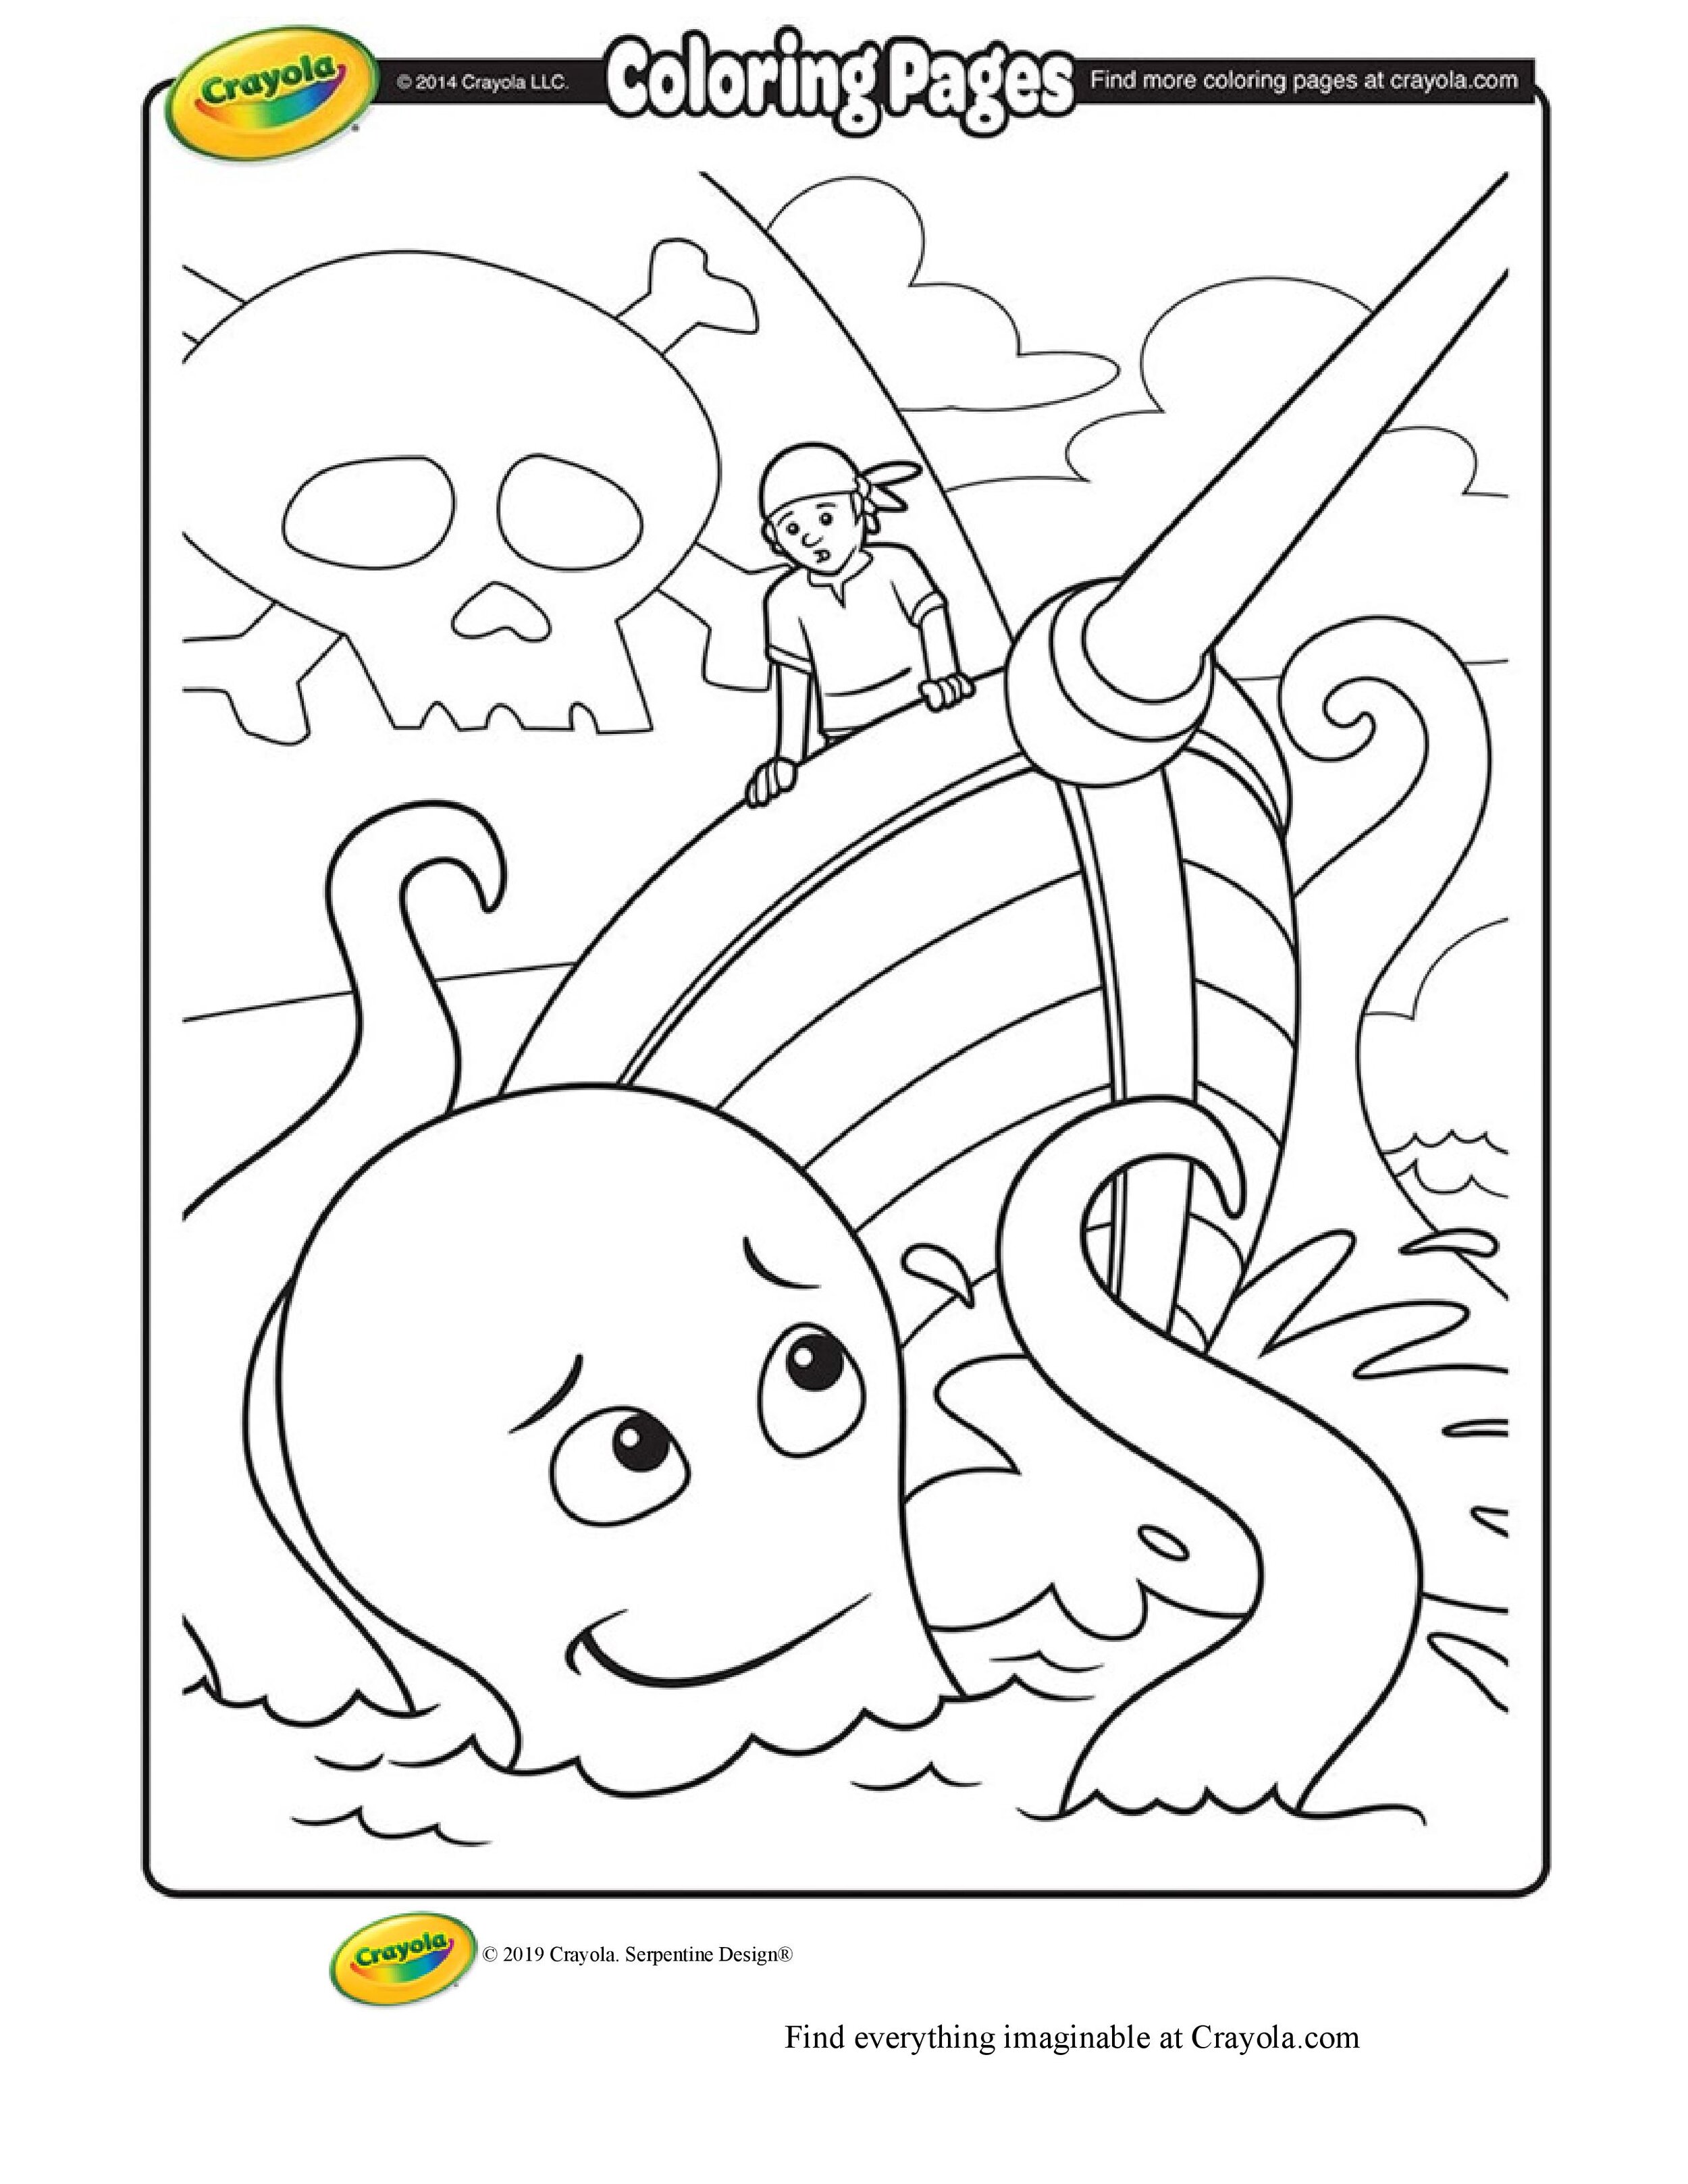 Pirate Ship and Giant Sea Creature Coloring Page.jpg